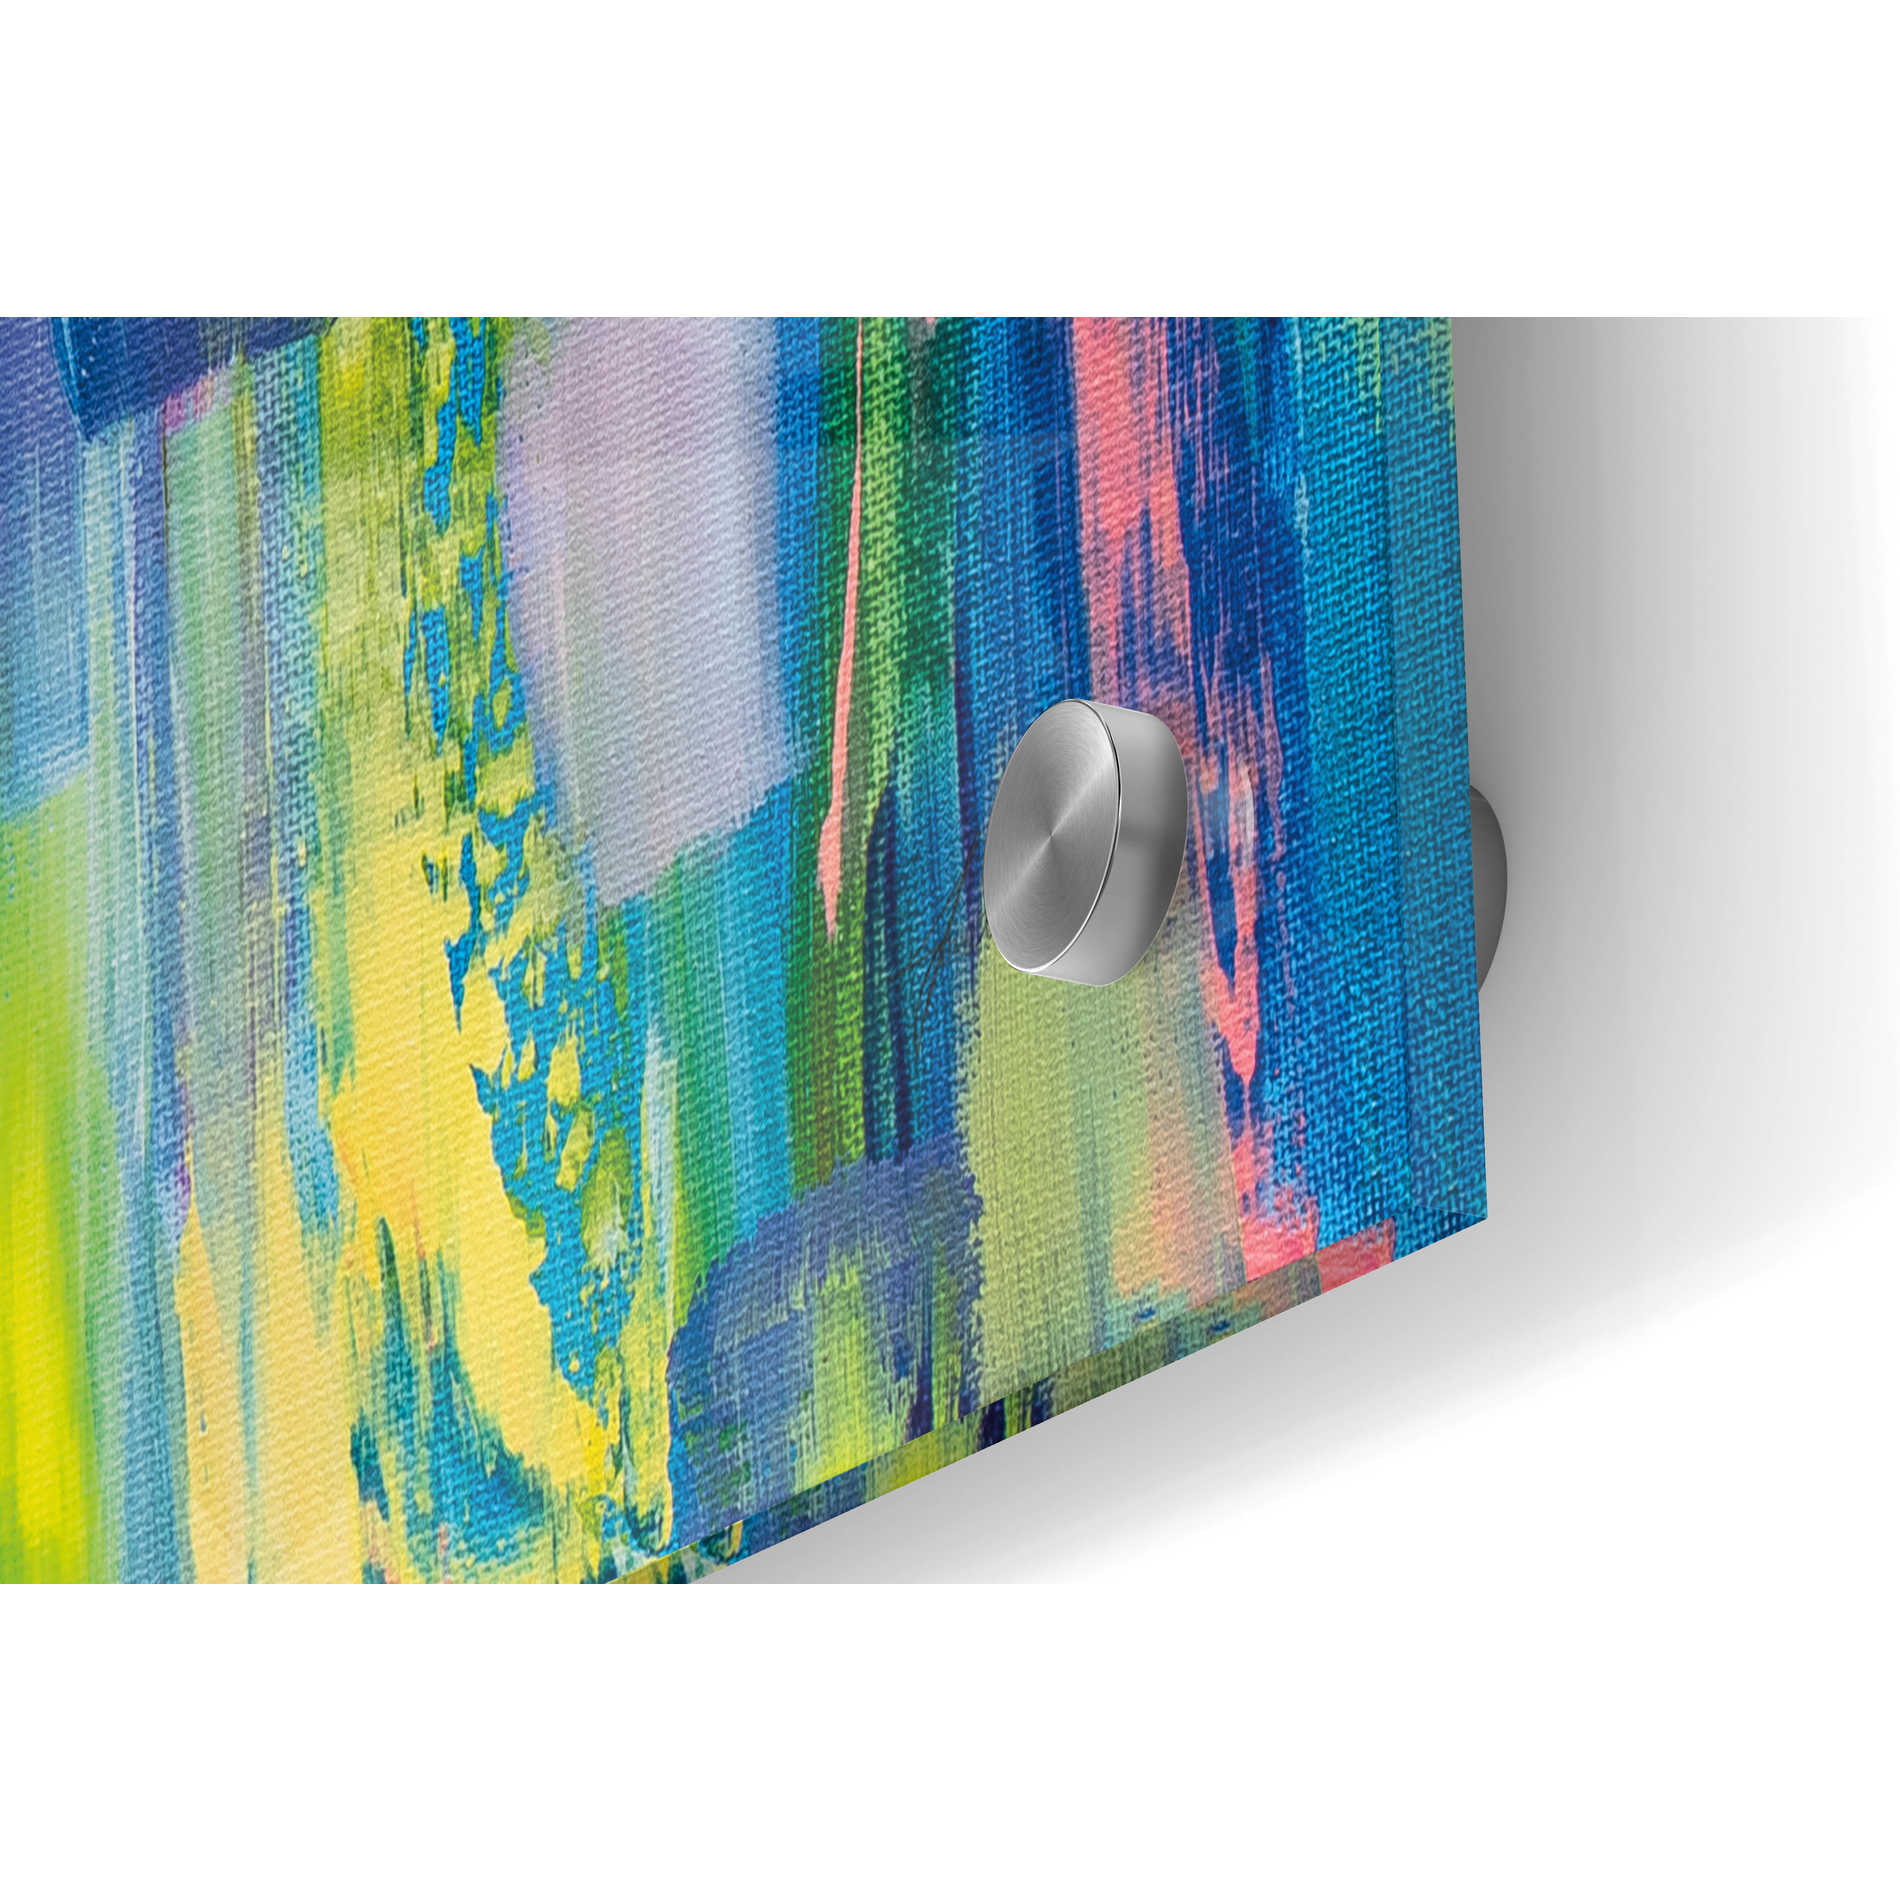 Epic Art 'Radiance' by Jeanette Vertentes, Acrylic Glass Wall Art,36x24